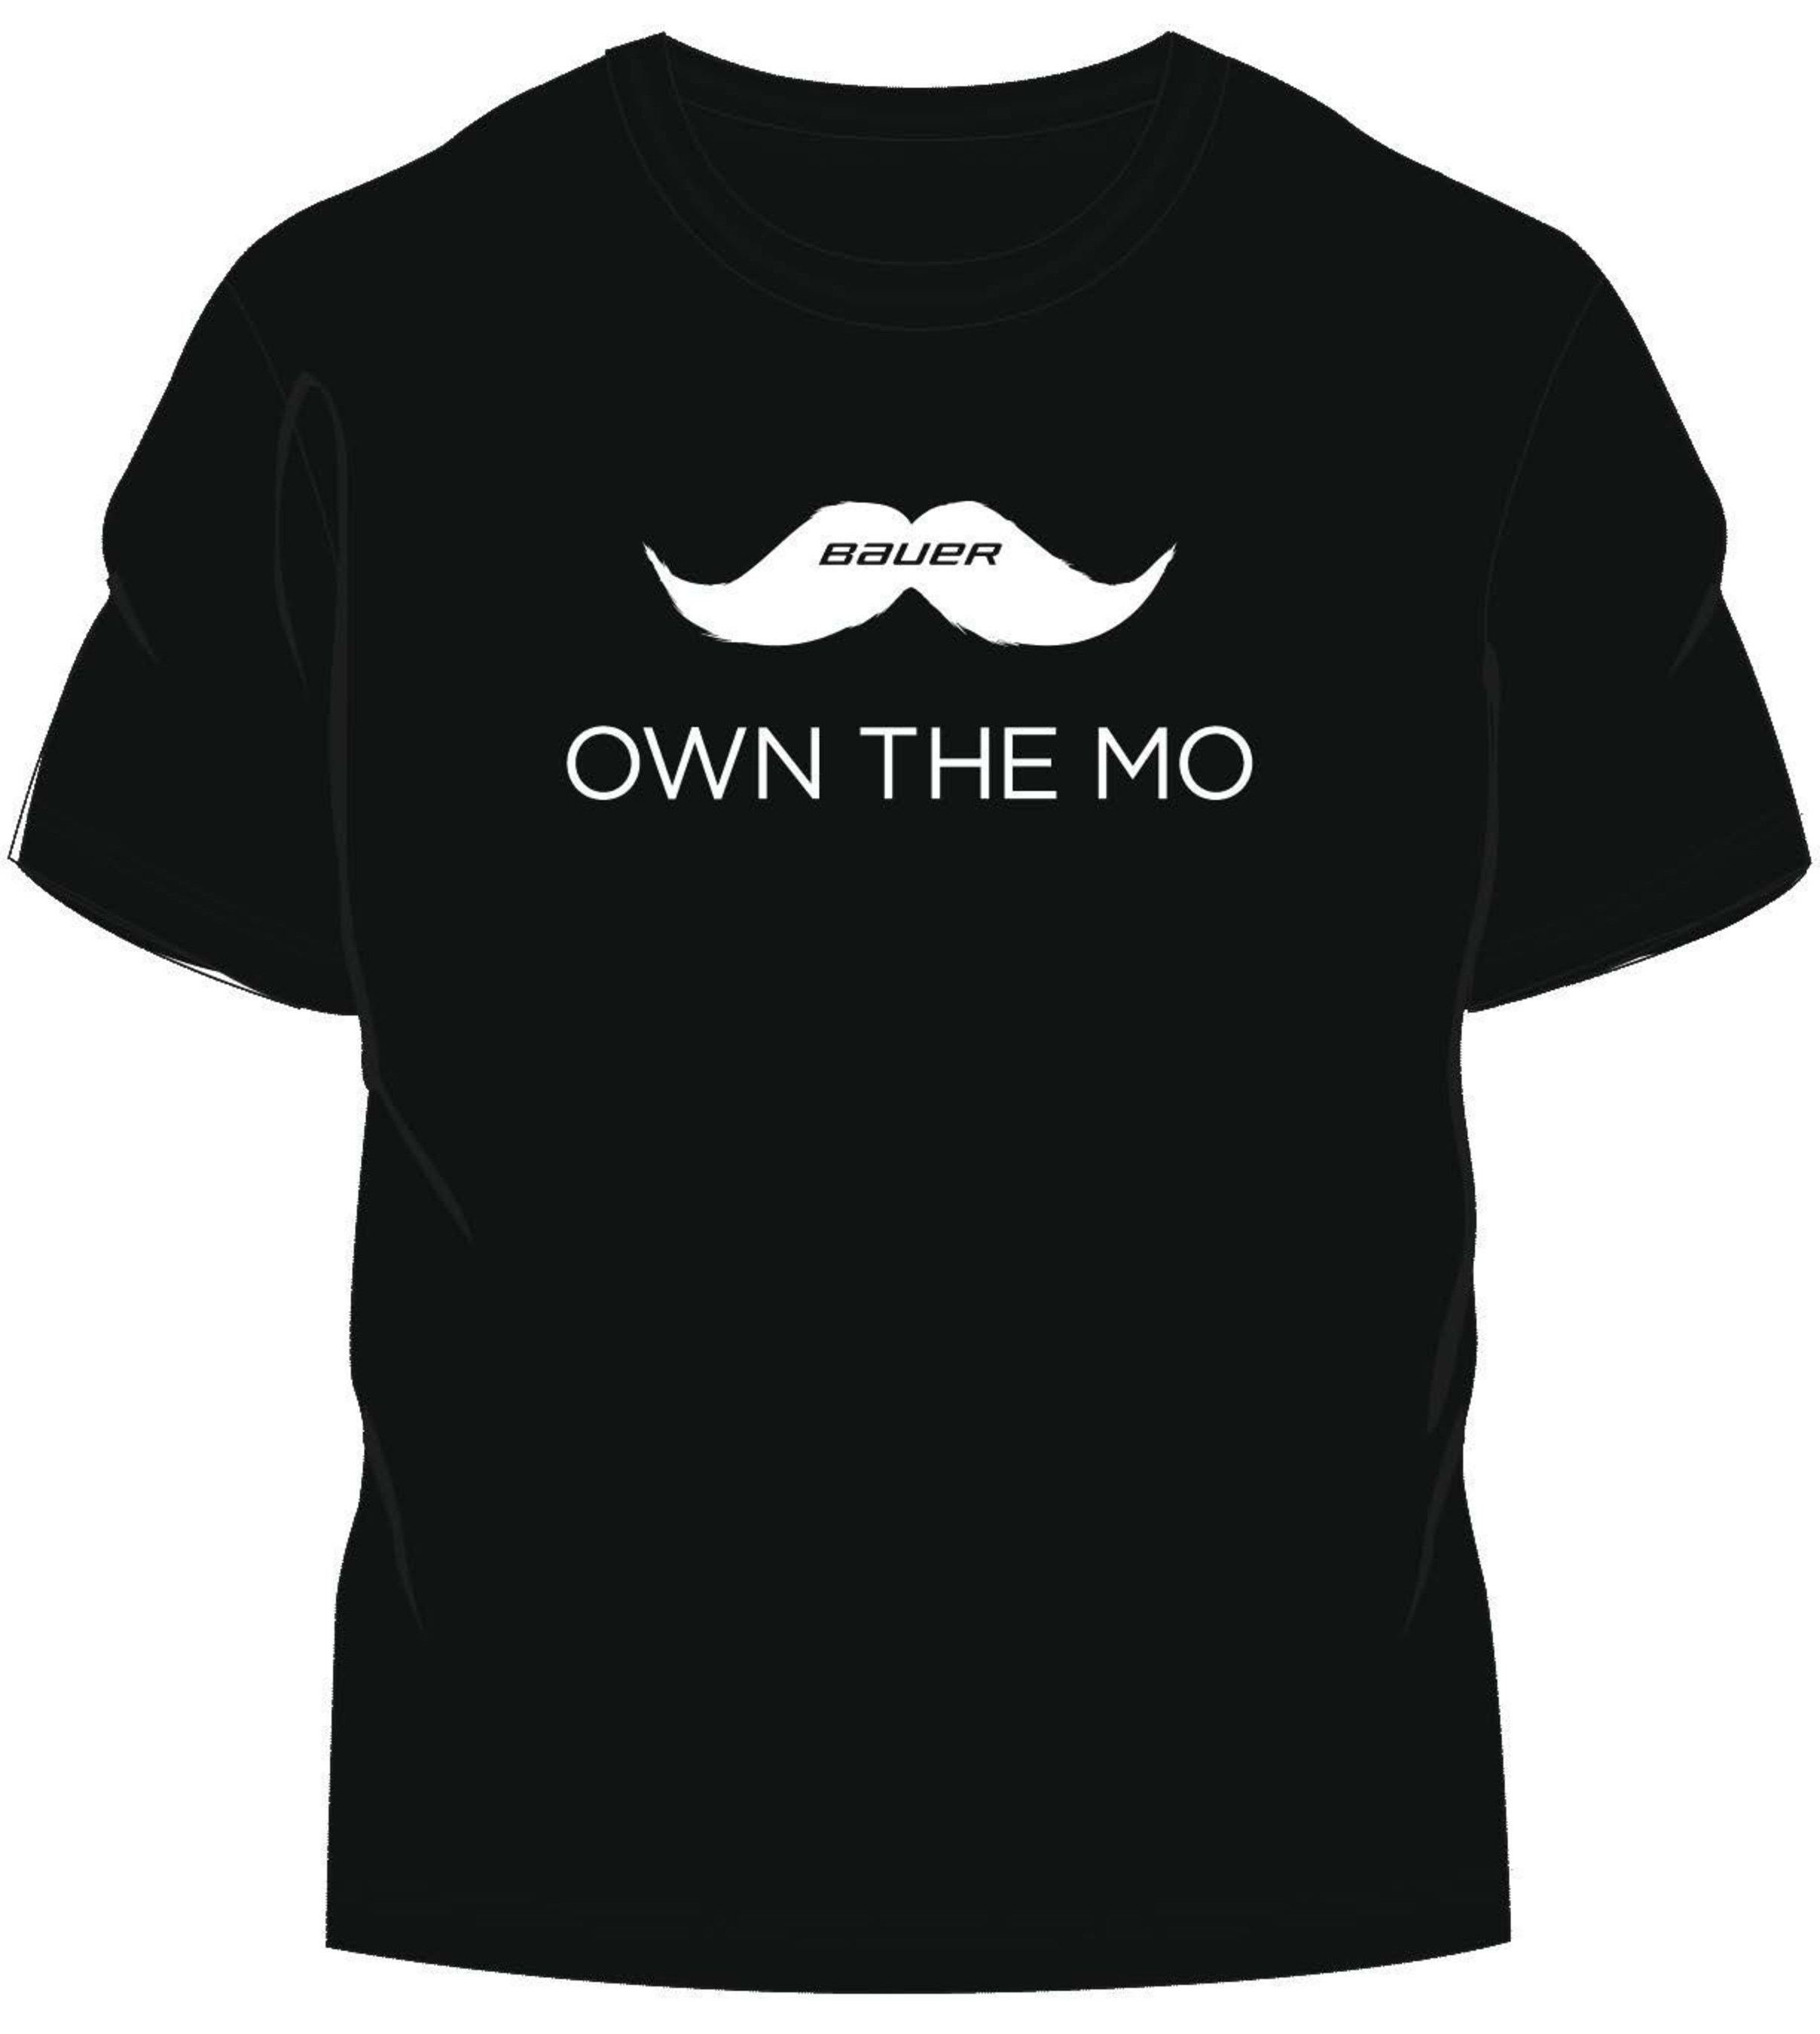 Limited edition Bauer Hockey "Own the Mo" t-shirts will support the Movember Foundation